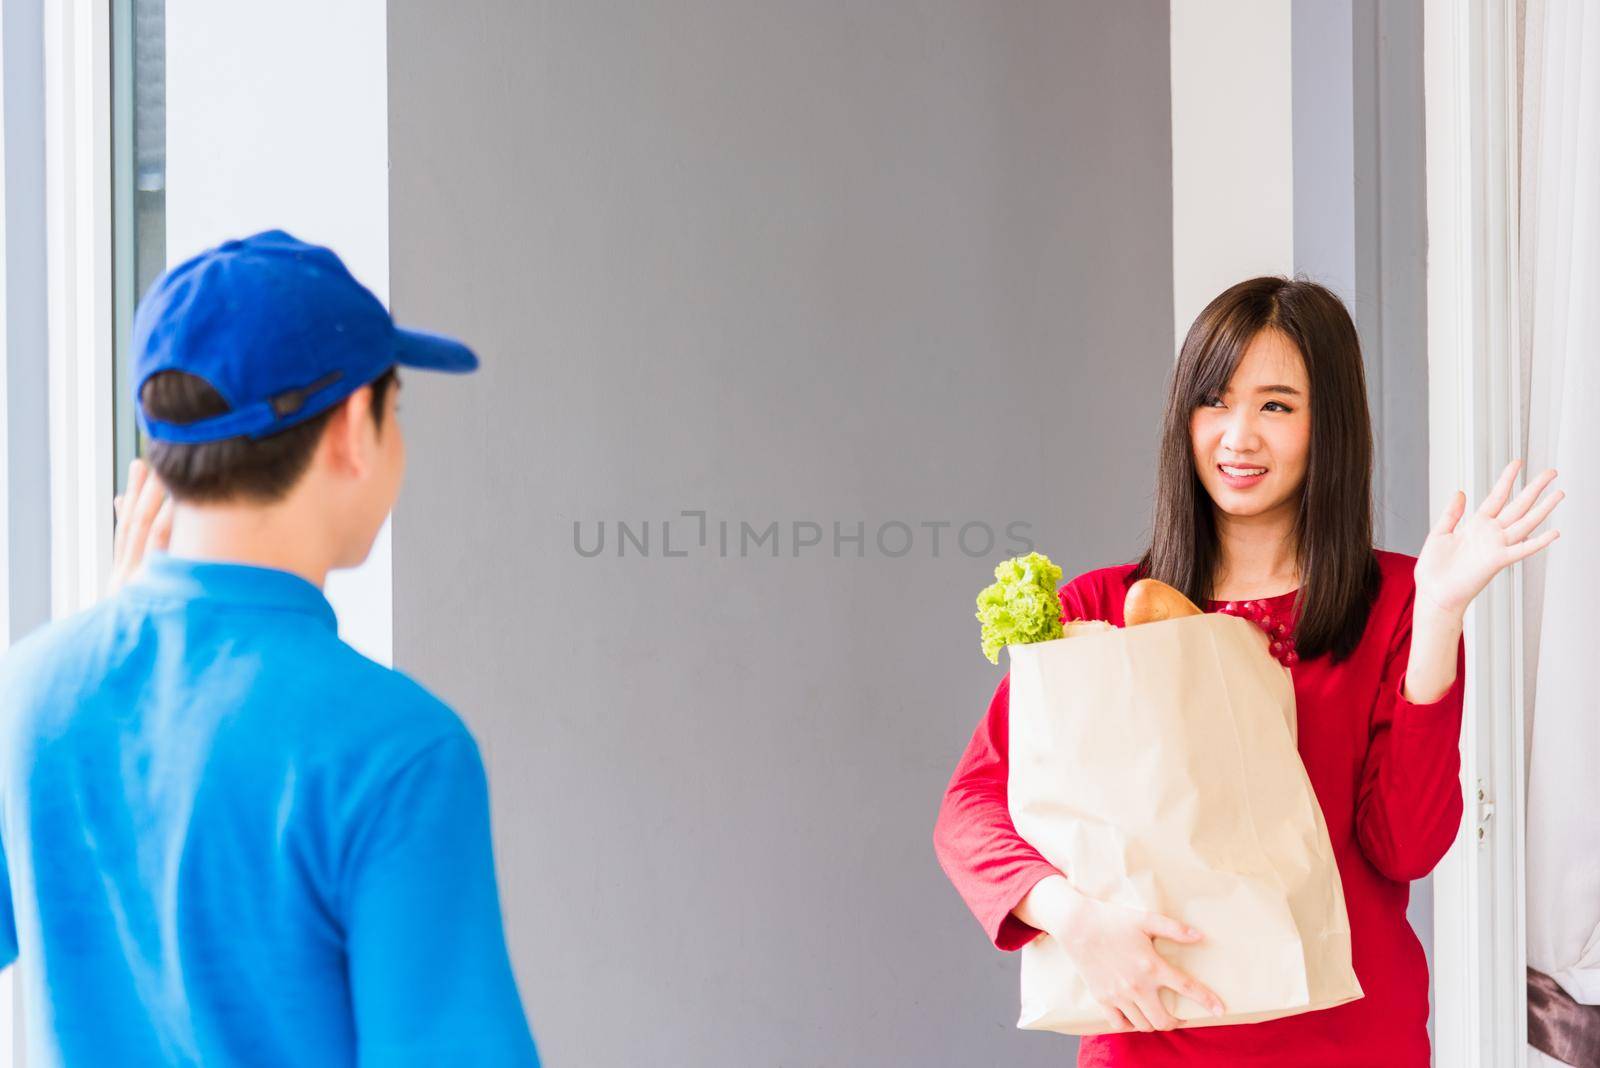 Delivery man making grocery service giving fresh vegetables in paper bag to woman customer by Sorapop